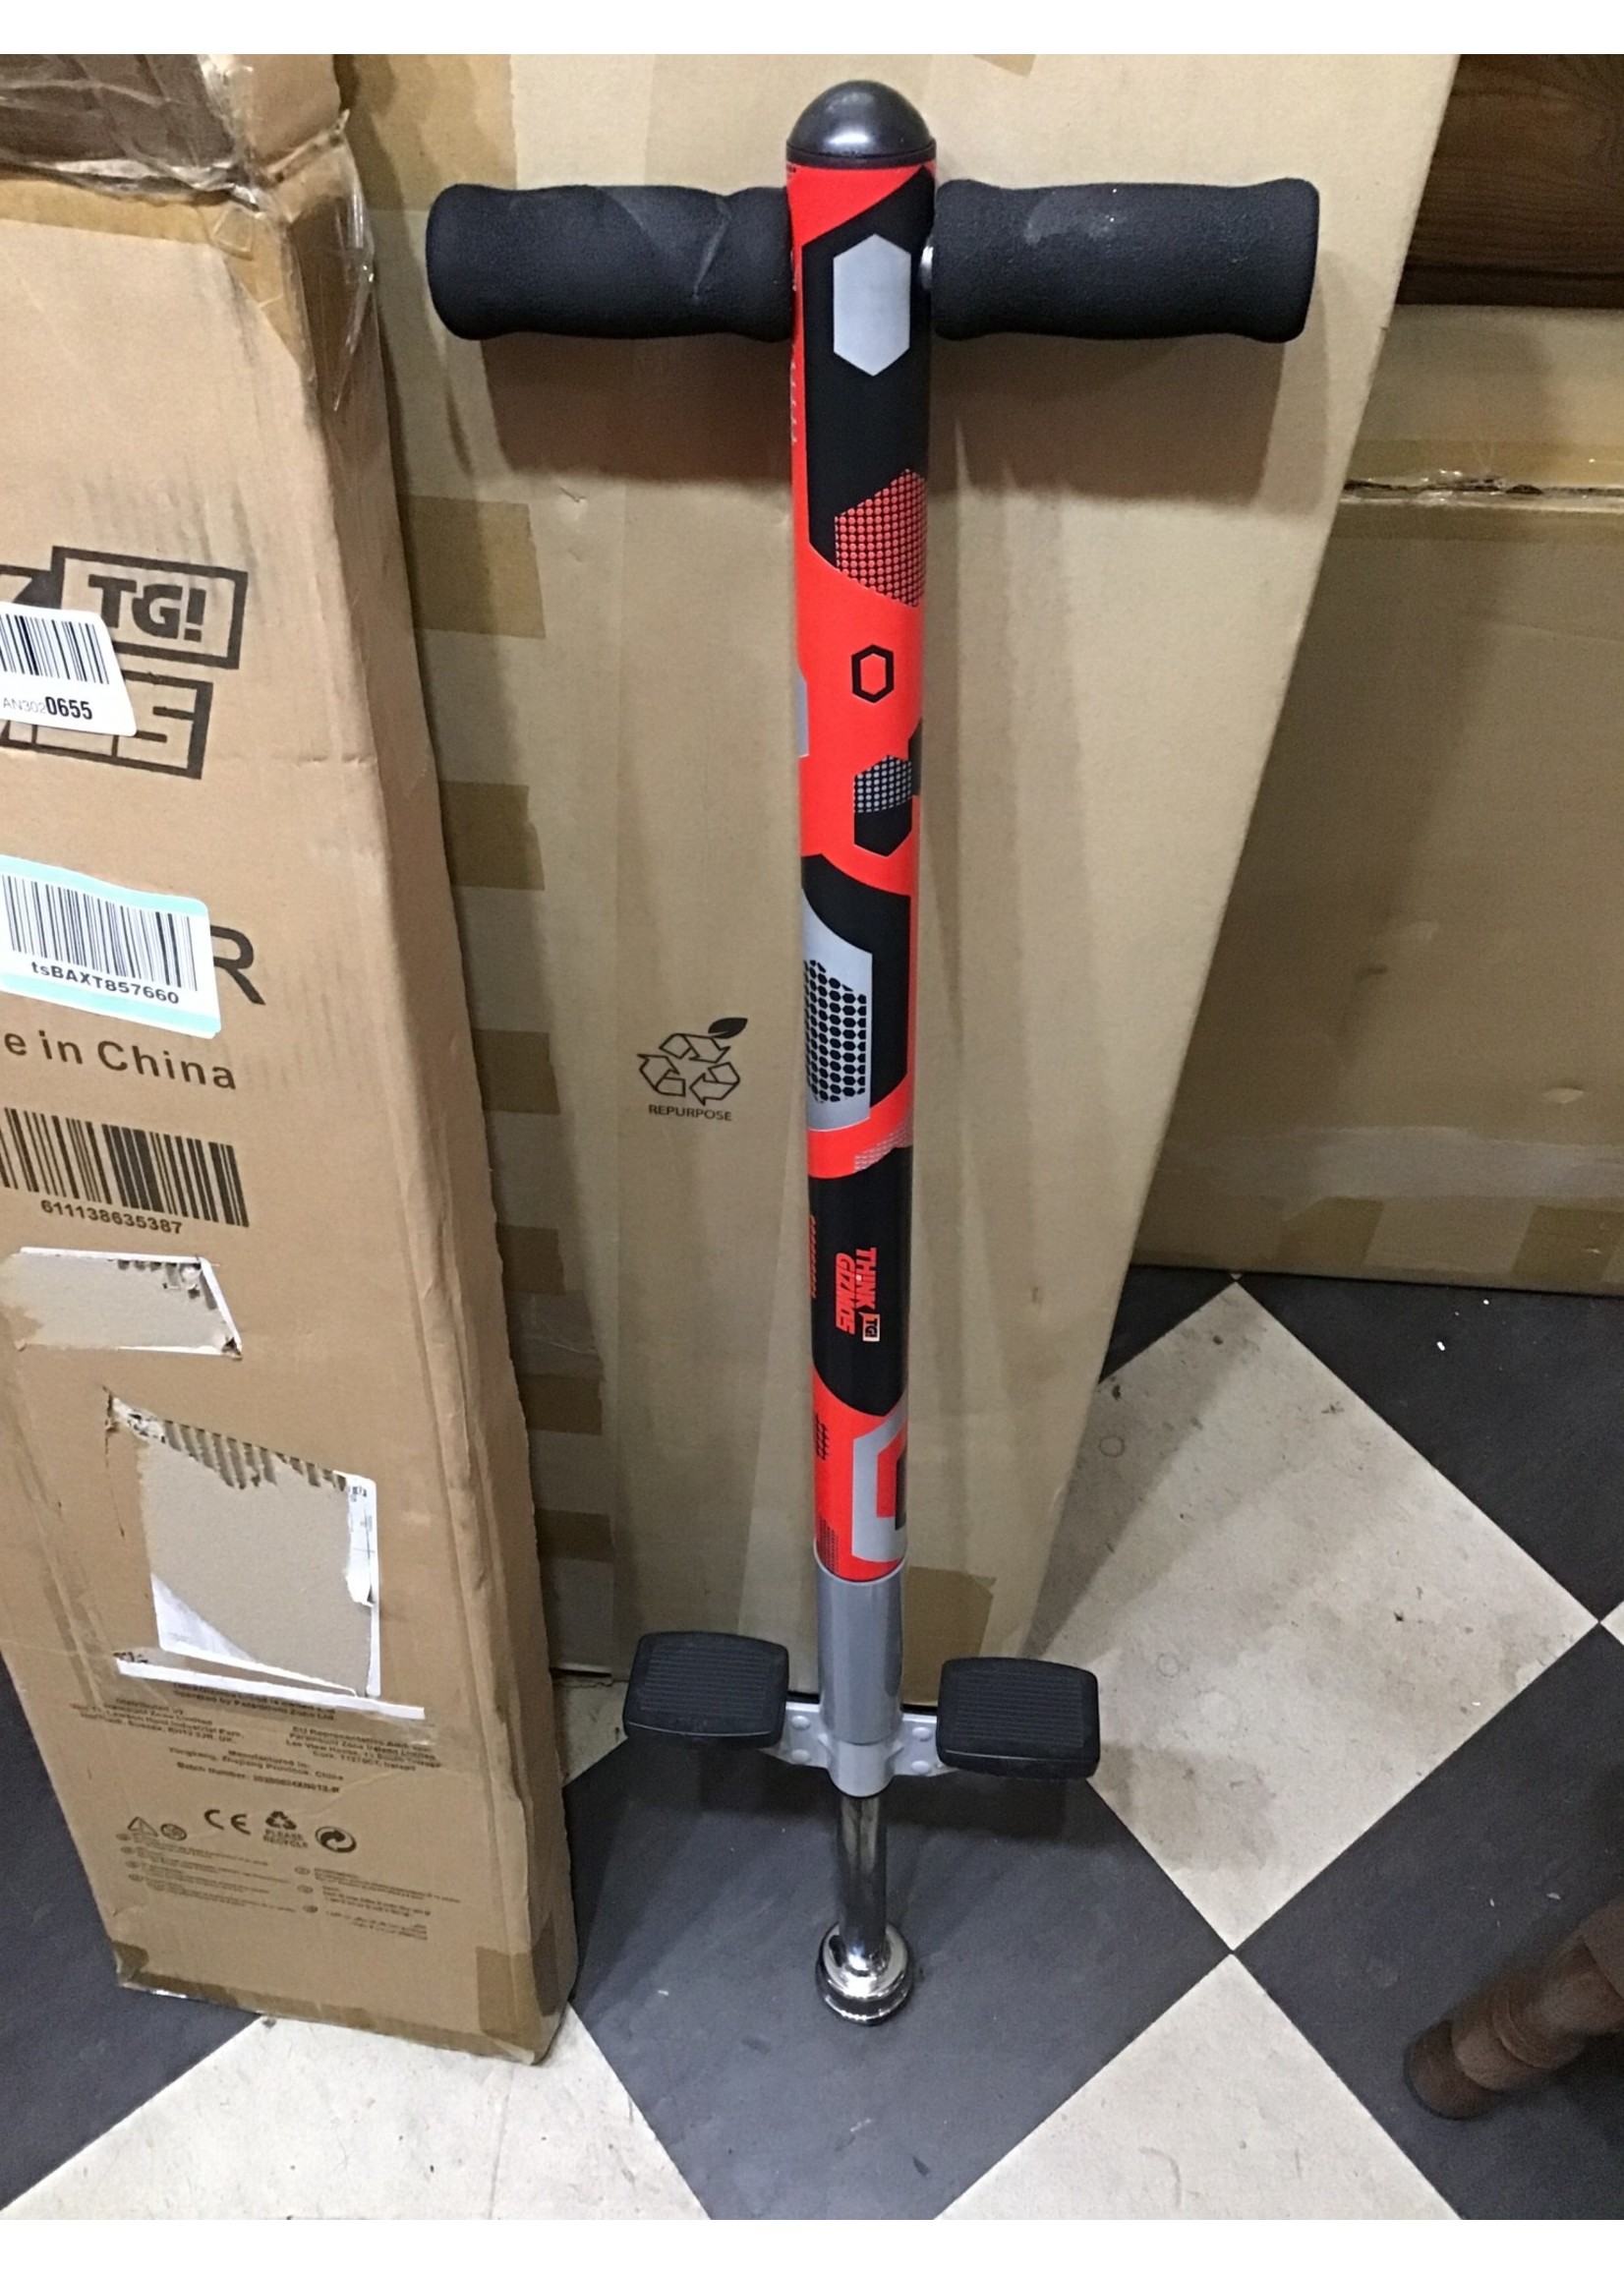 Pogo Stick- Aero Advantage - for Kids 5-10 Yrs Old & up to 90lbs (36kgs) - Awesome Fun Quality by Think Gizmos - red